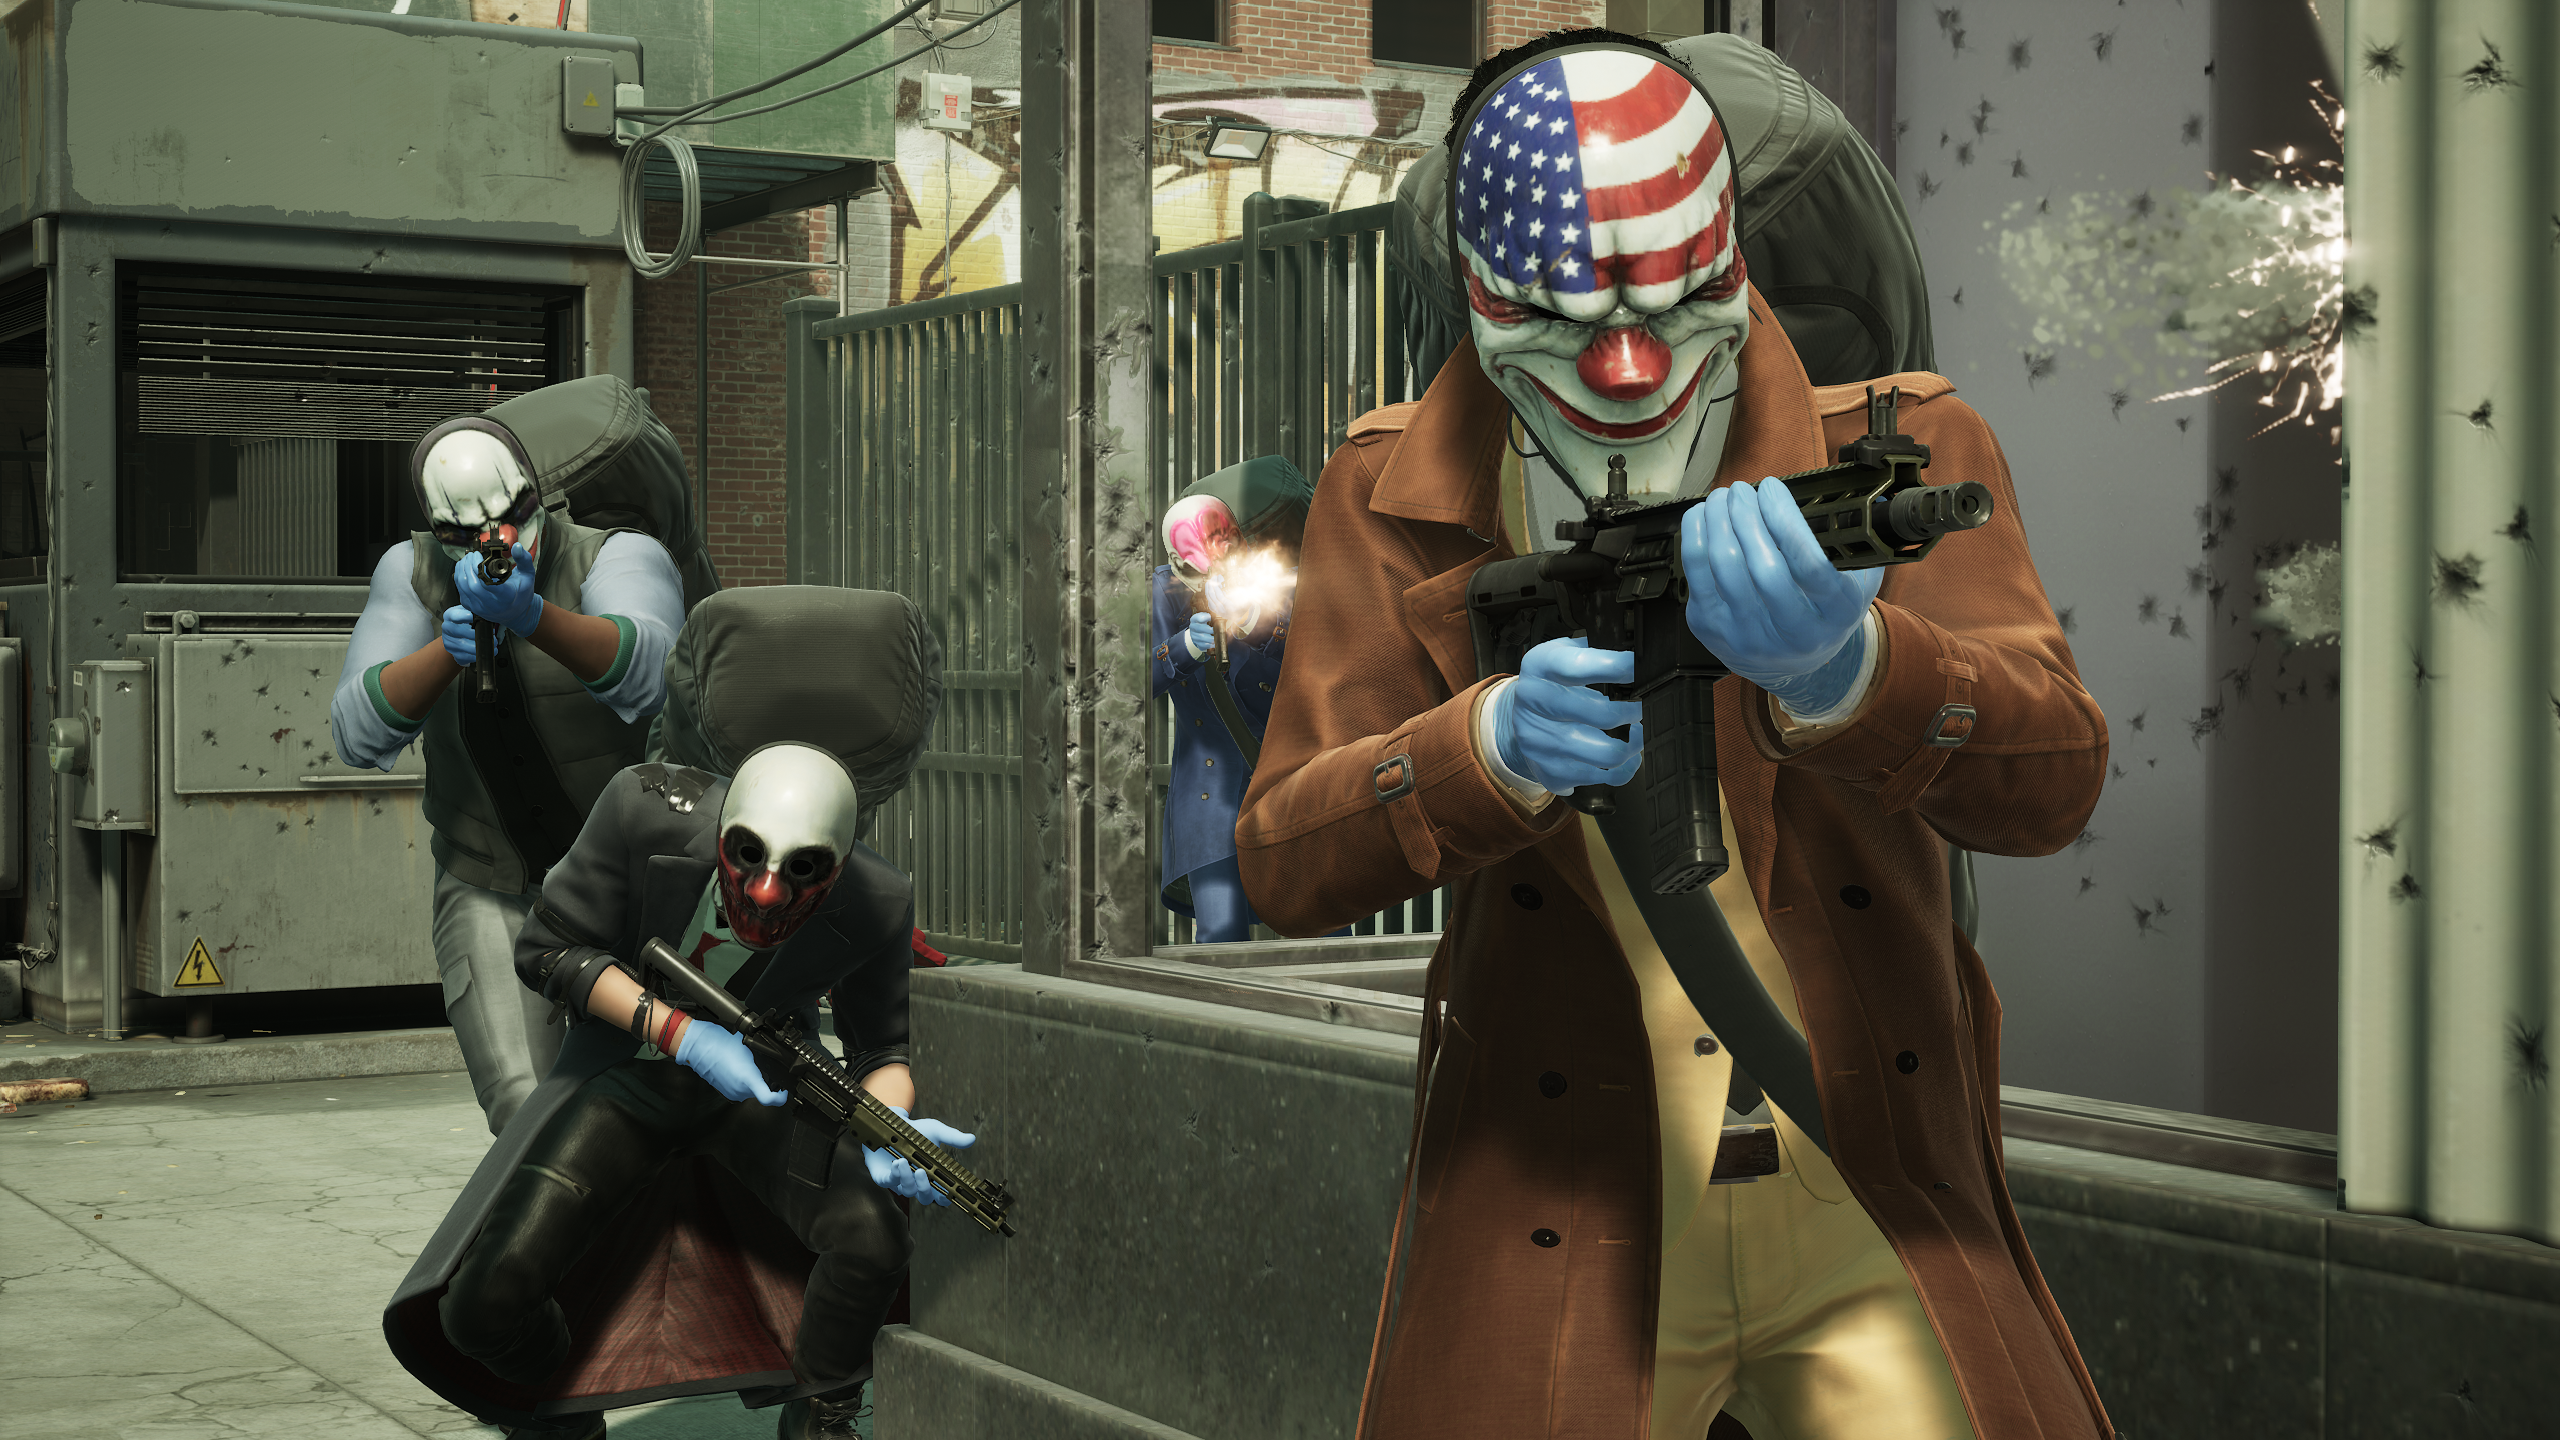 Payday 3 players endure second consecutive day of server issues